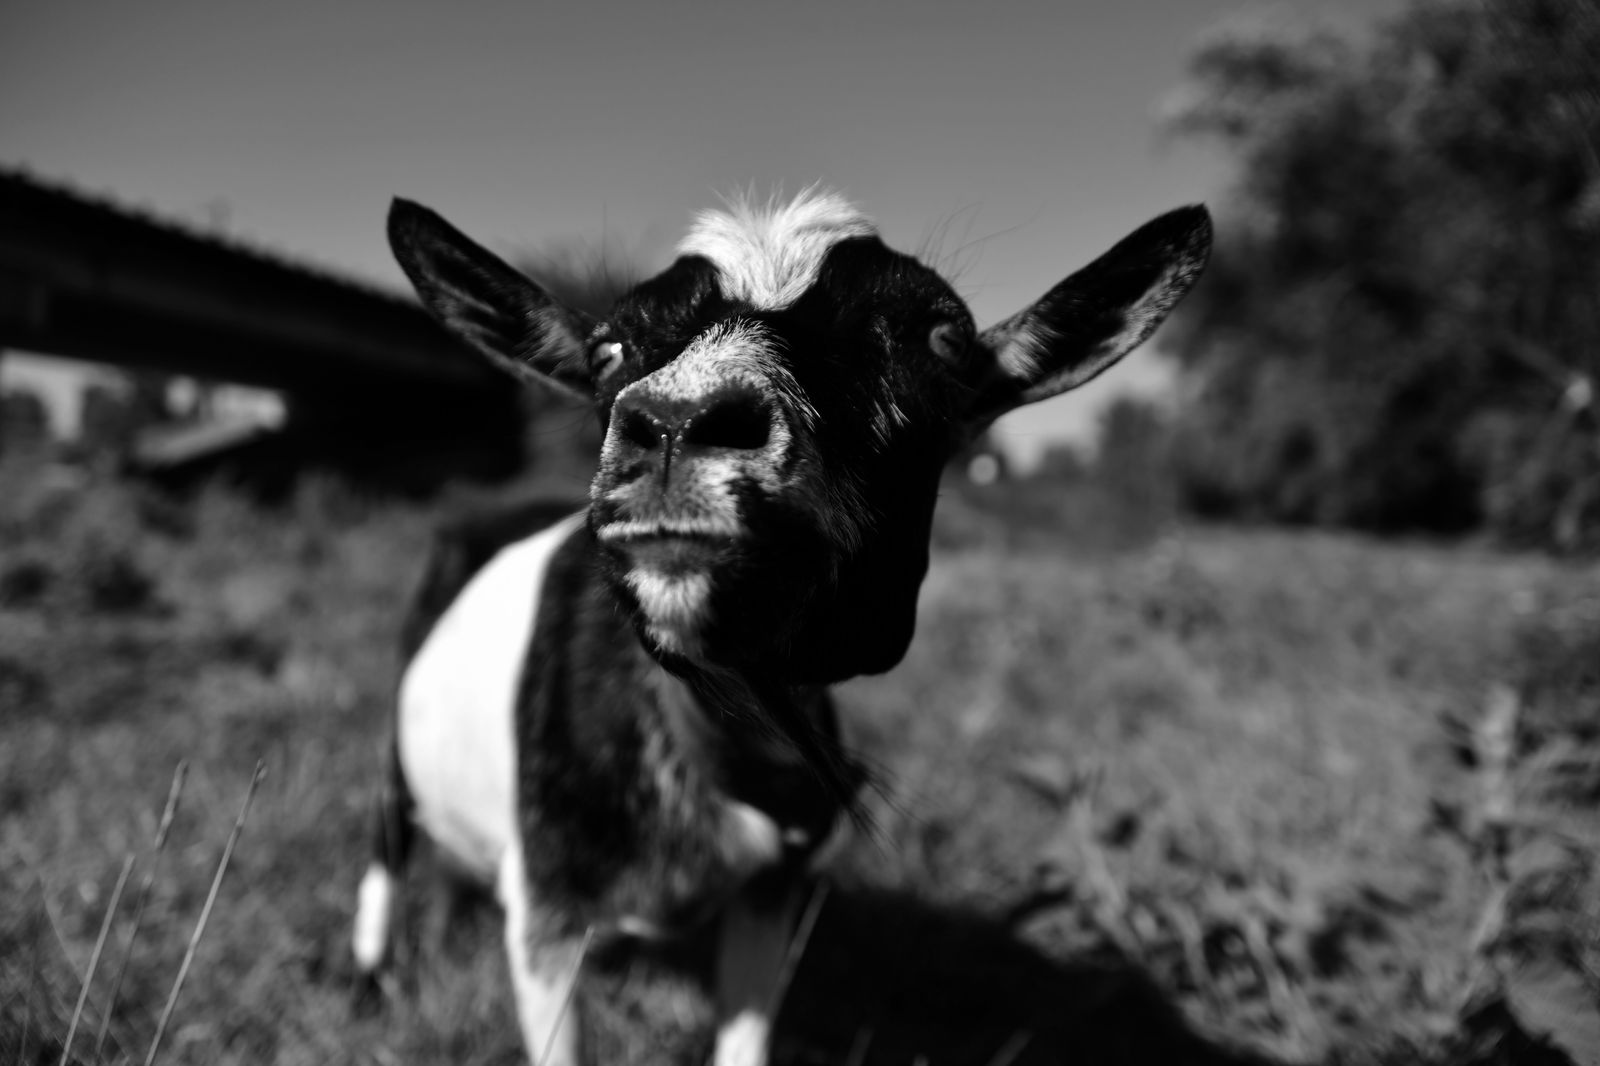 © Elena Bandurka - Image from the Cute Goats photography project